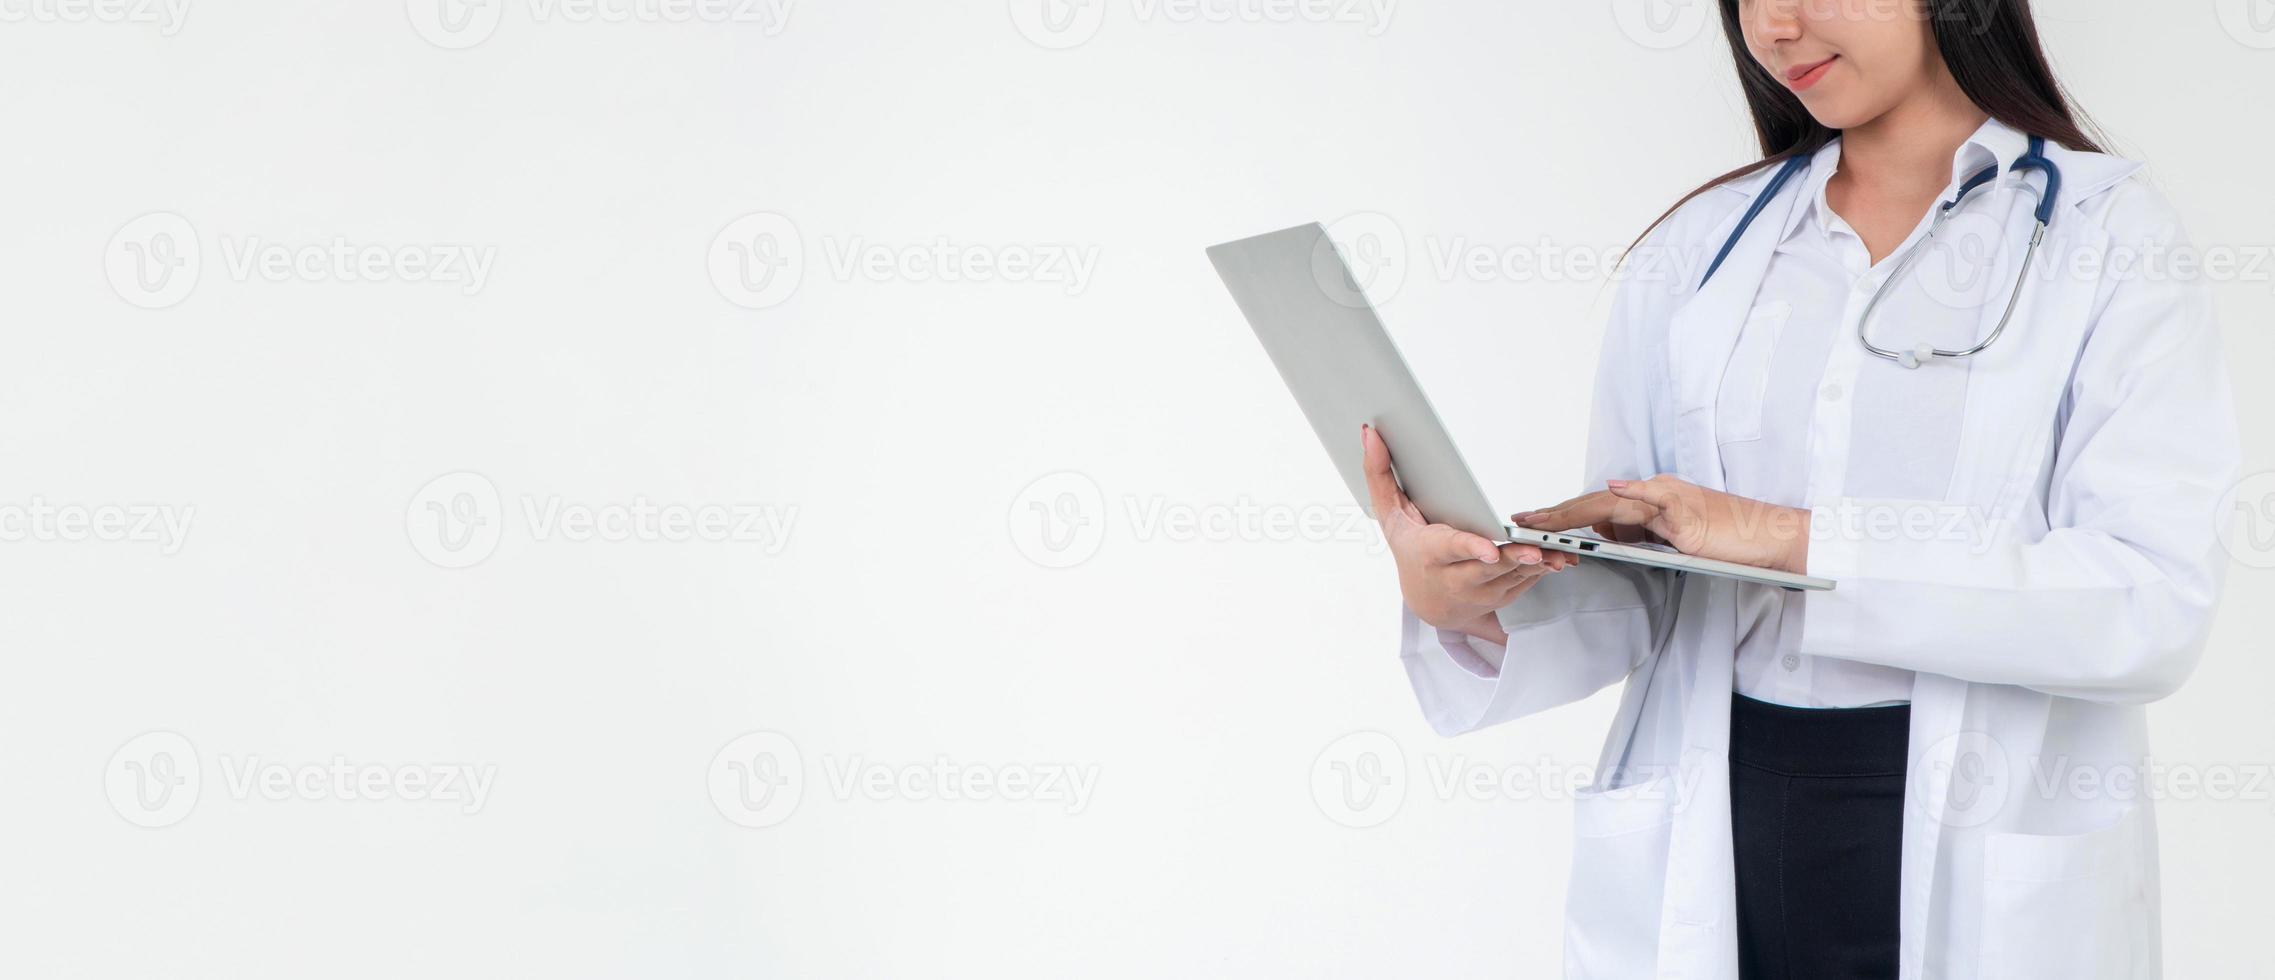 Female  Doctor or physician holding a laptop for checking patient health in hospital, Concept of online healthcare information and emergency healthcare assistance service, Medical service photo